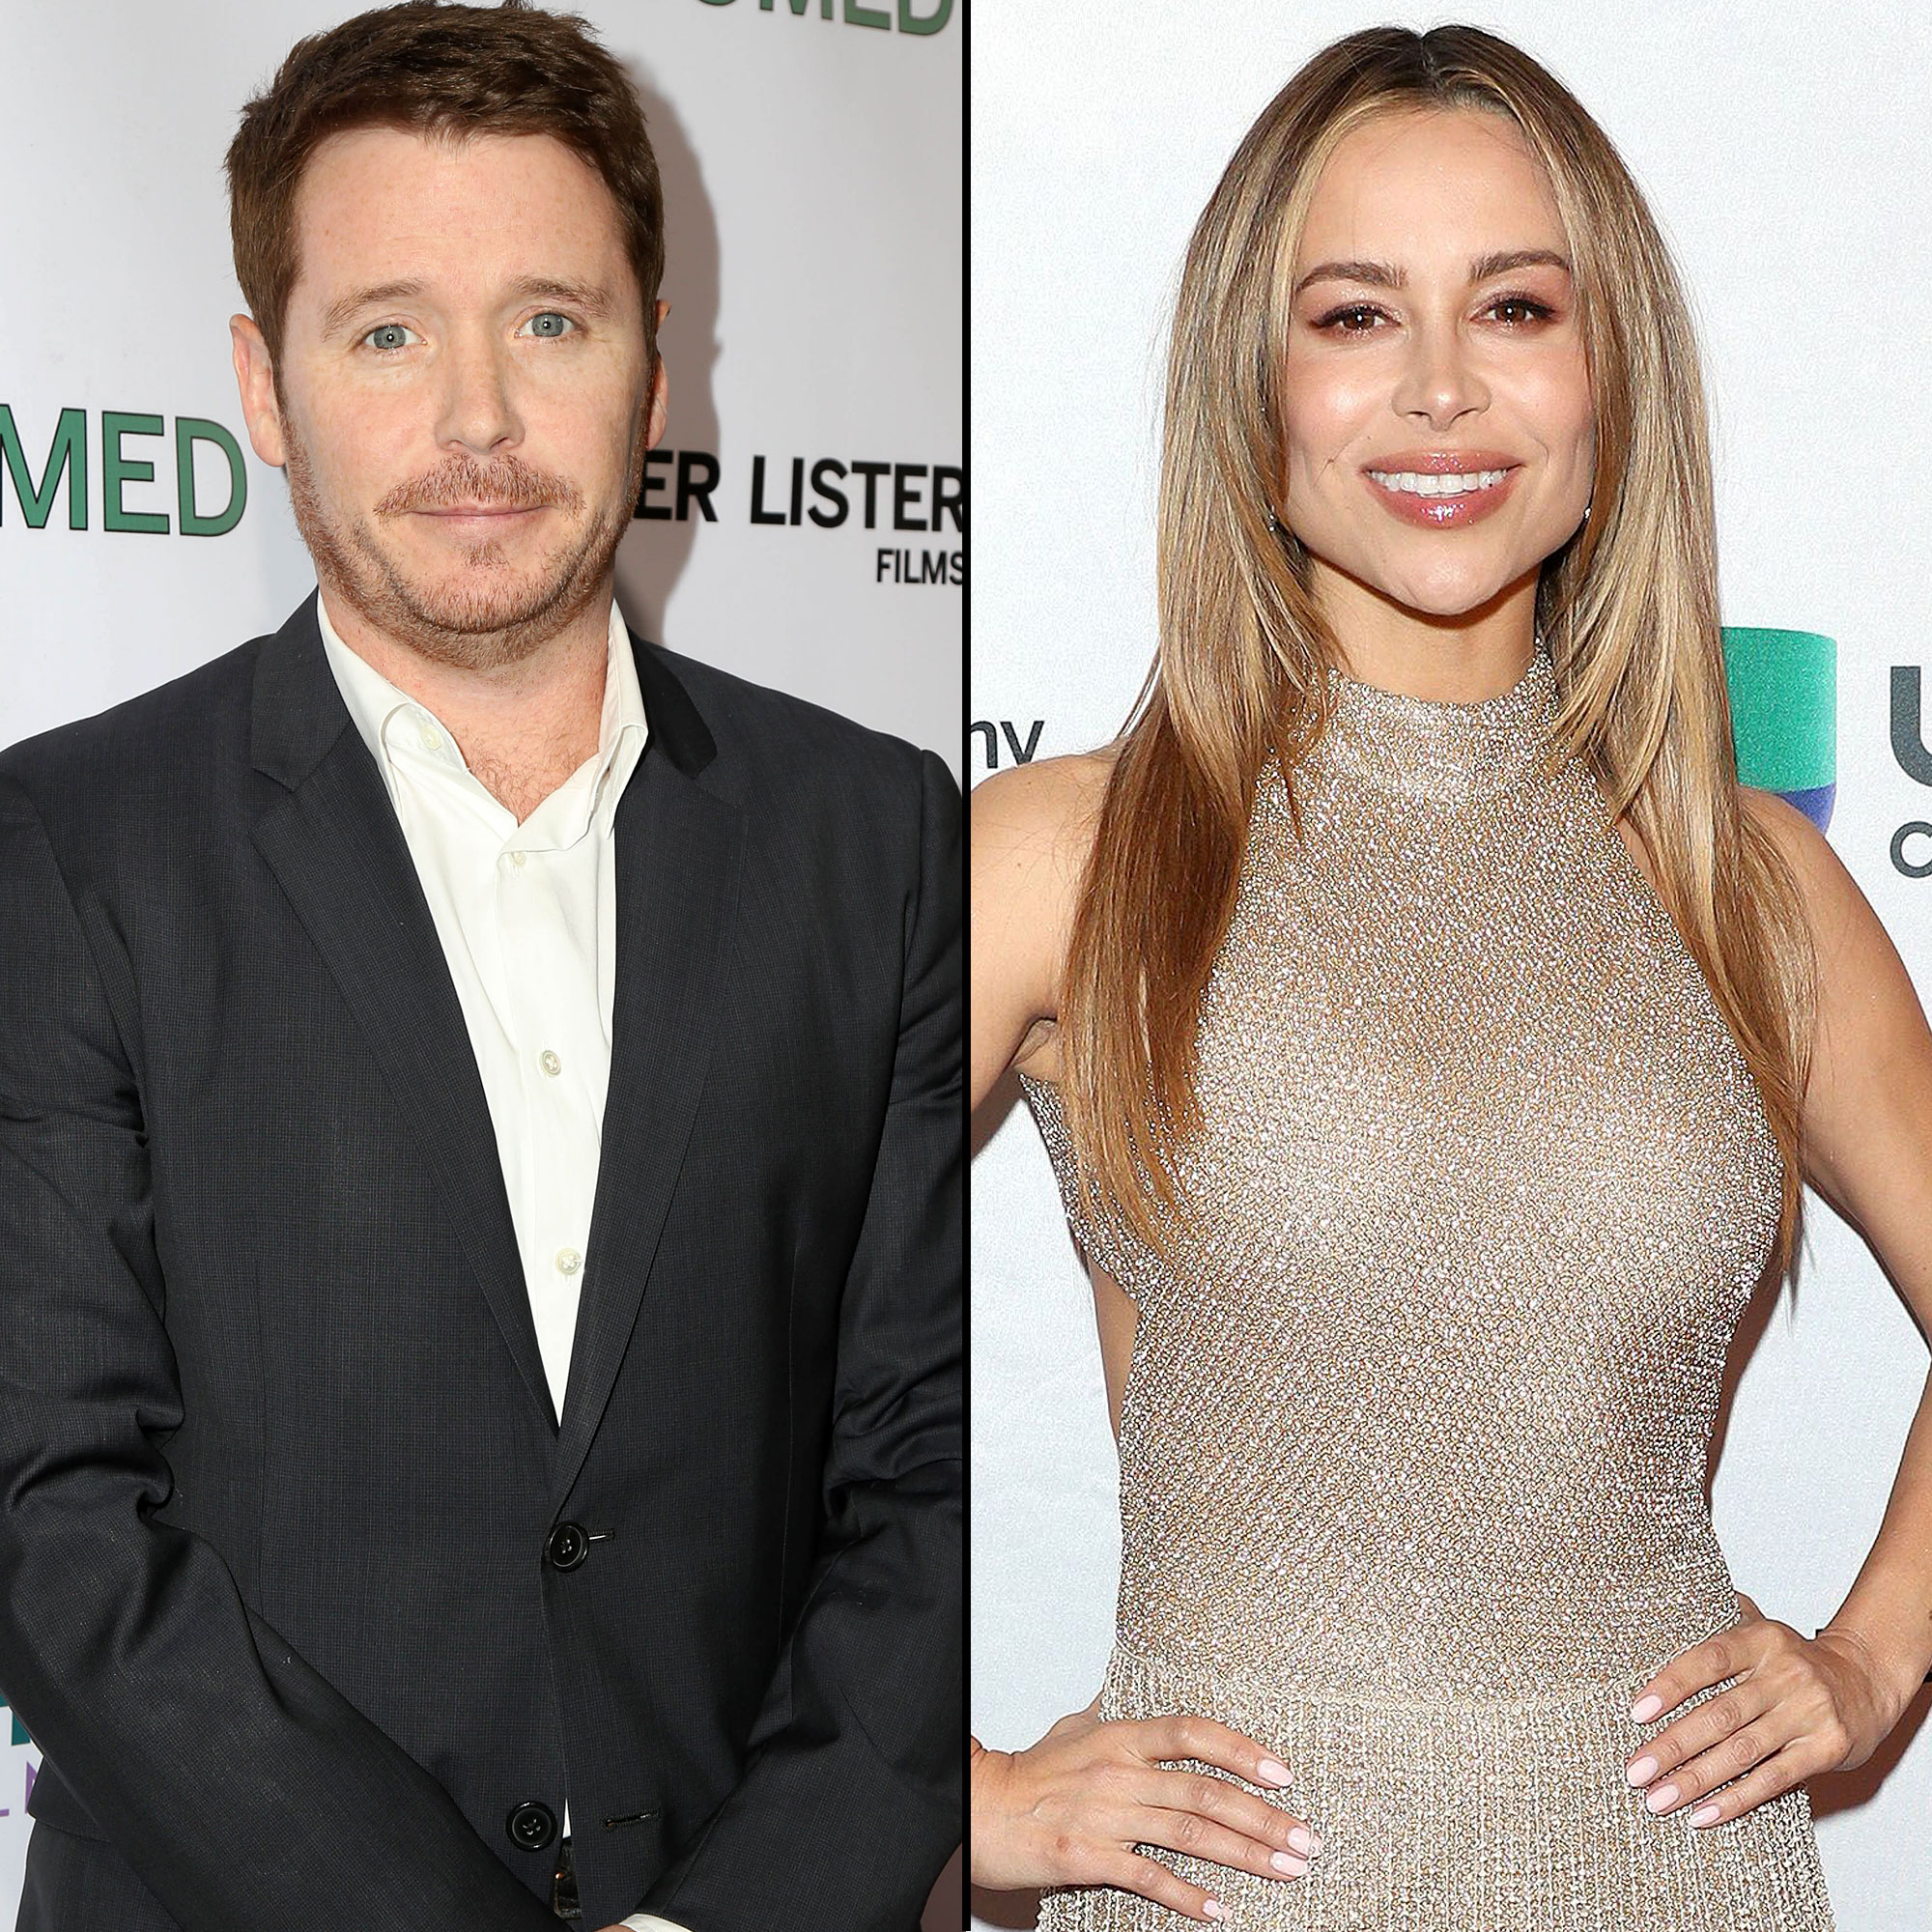 Kevin Connolly met sexy, vriendin Lydia Hearst 